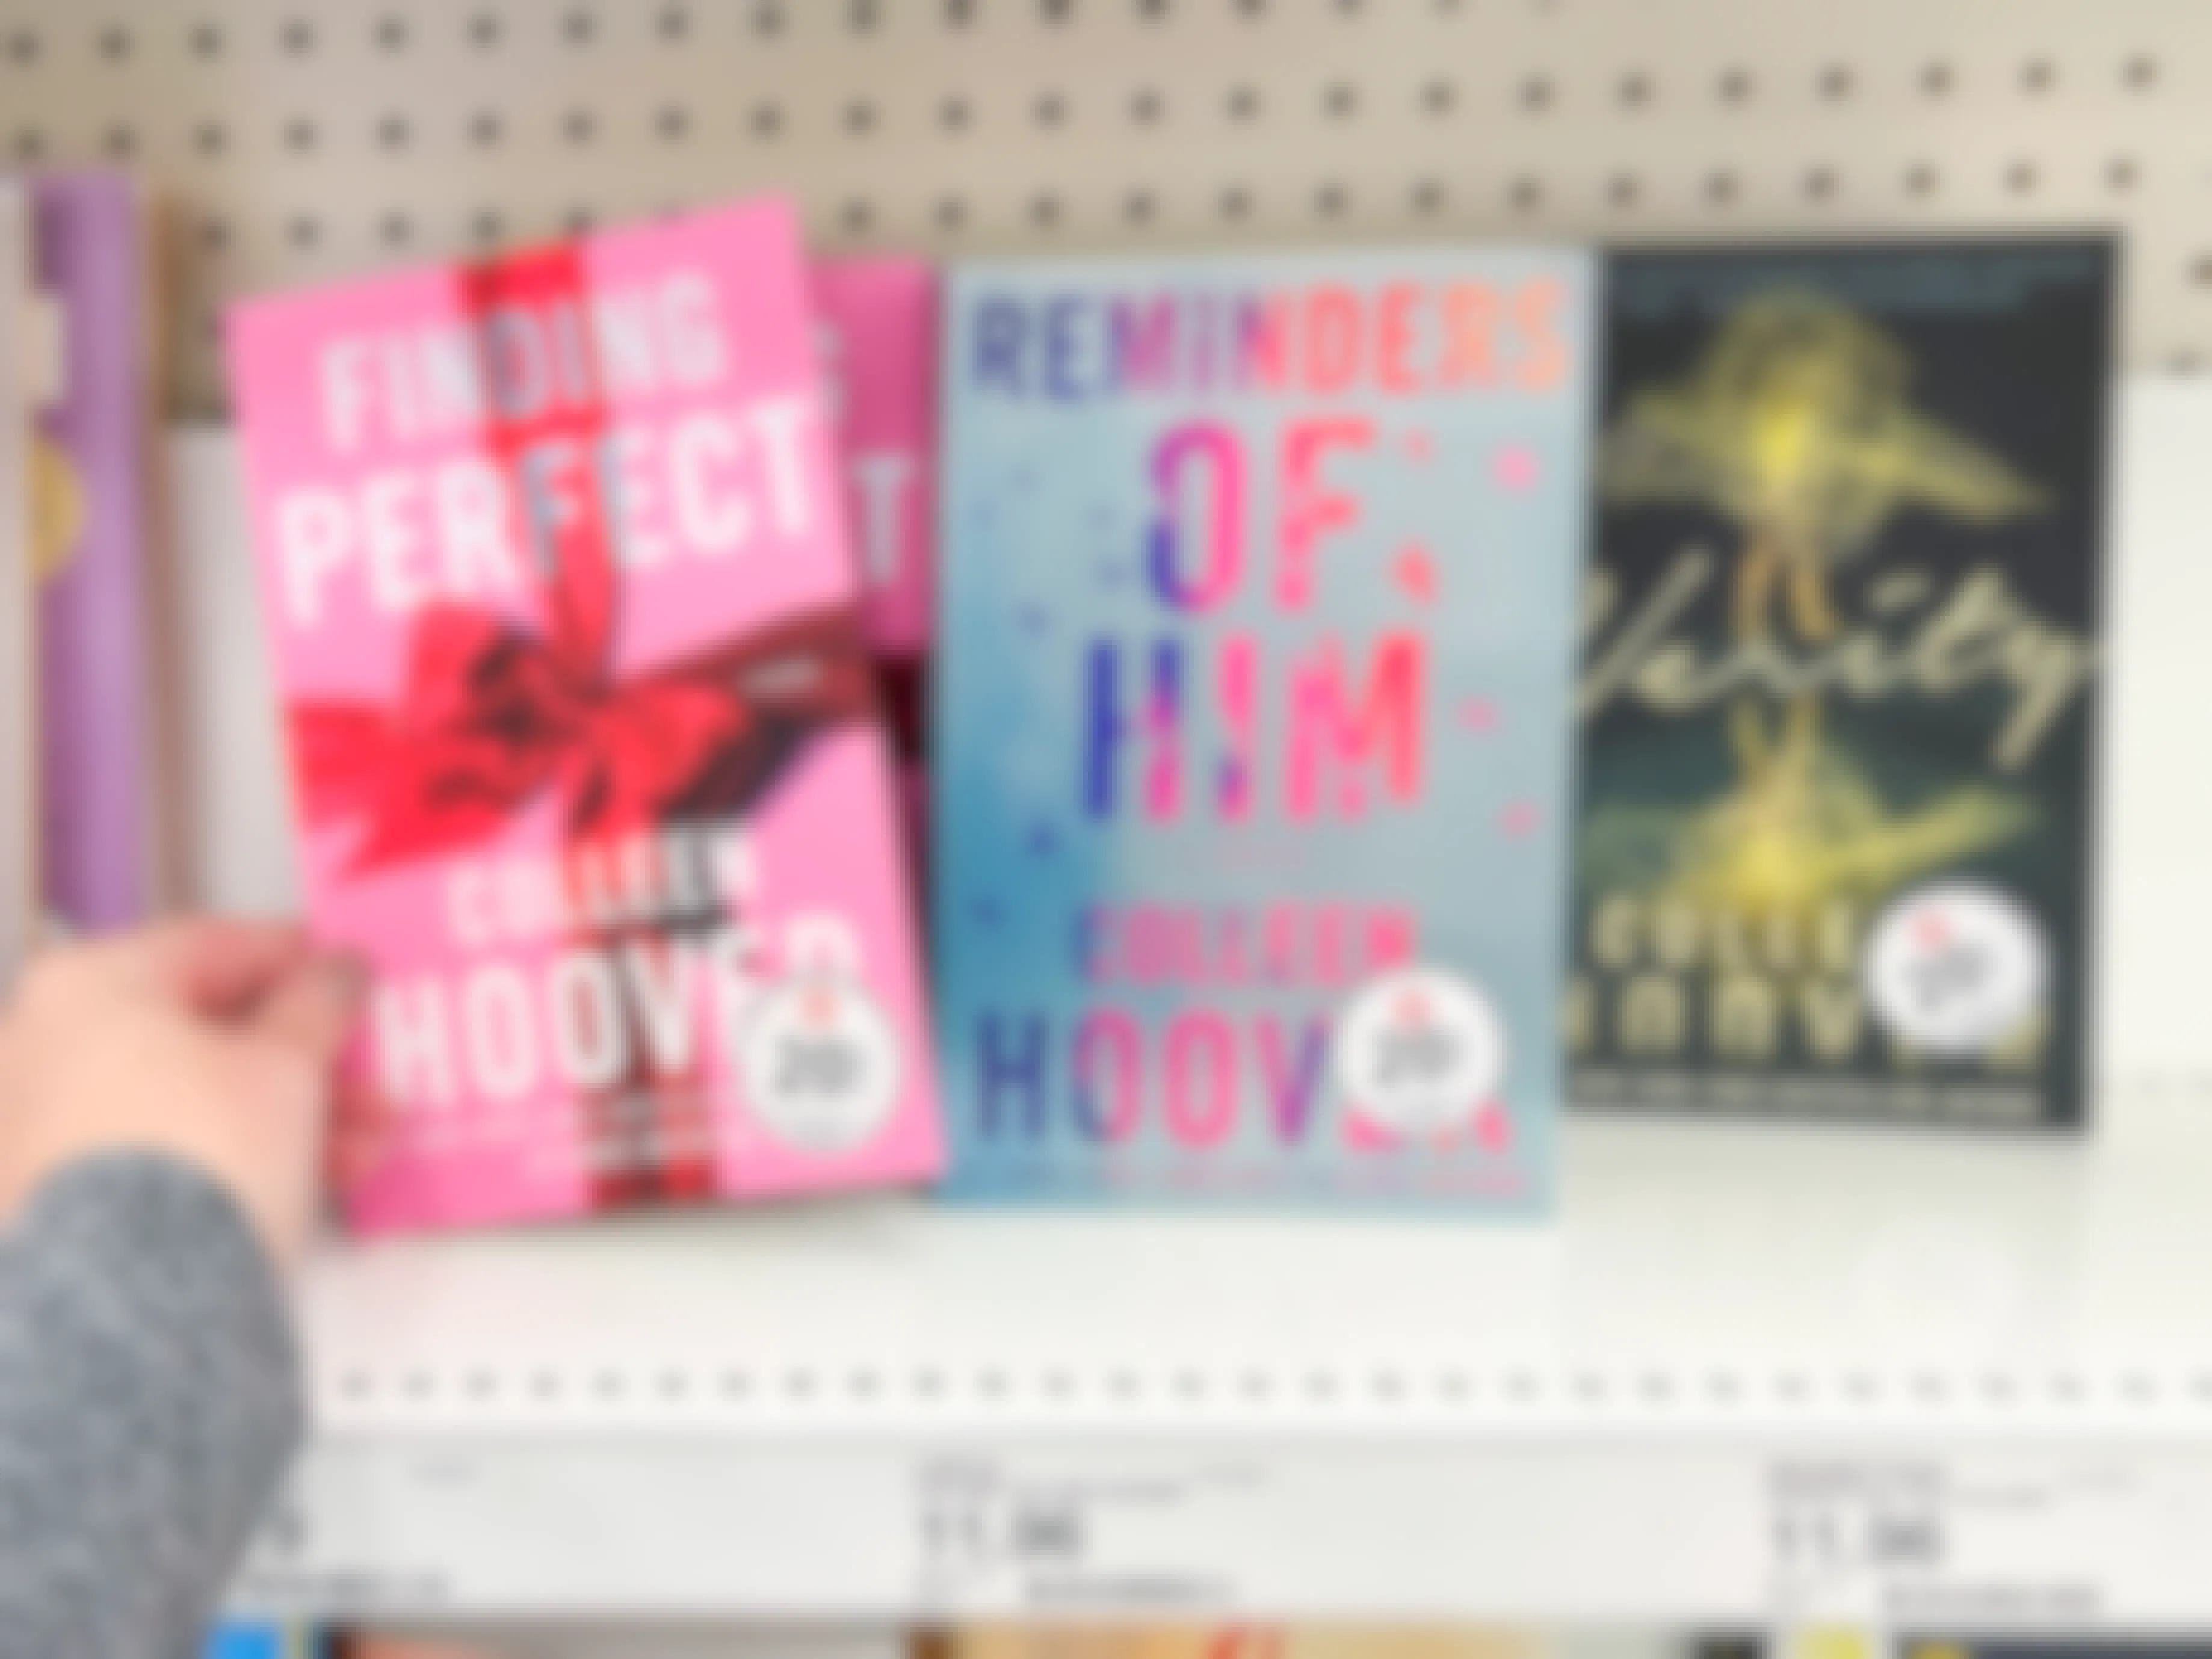 A person taking a Colleen Hoover book from a shelf at Target